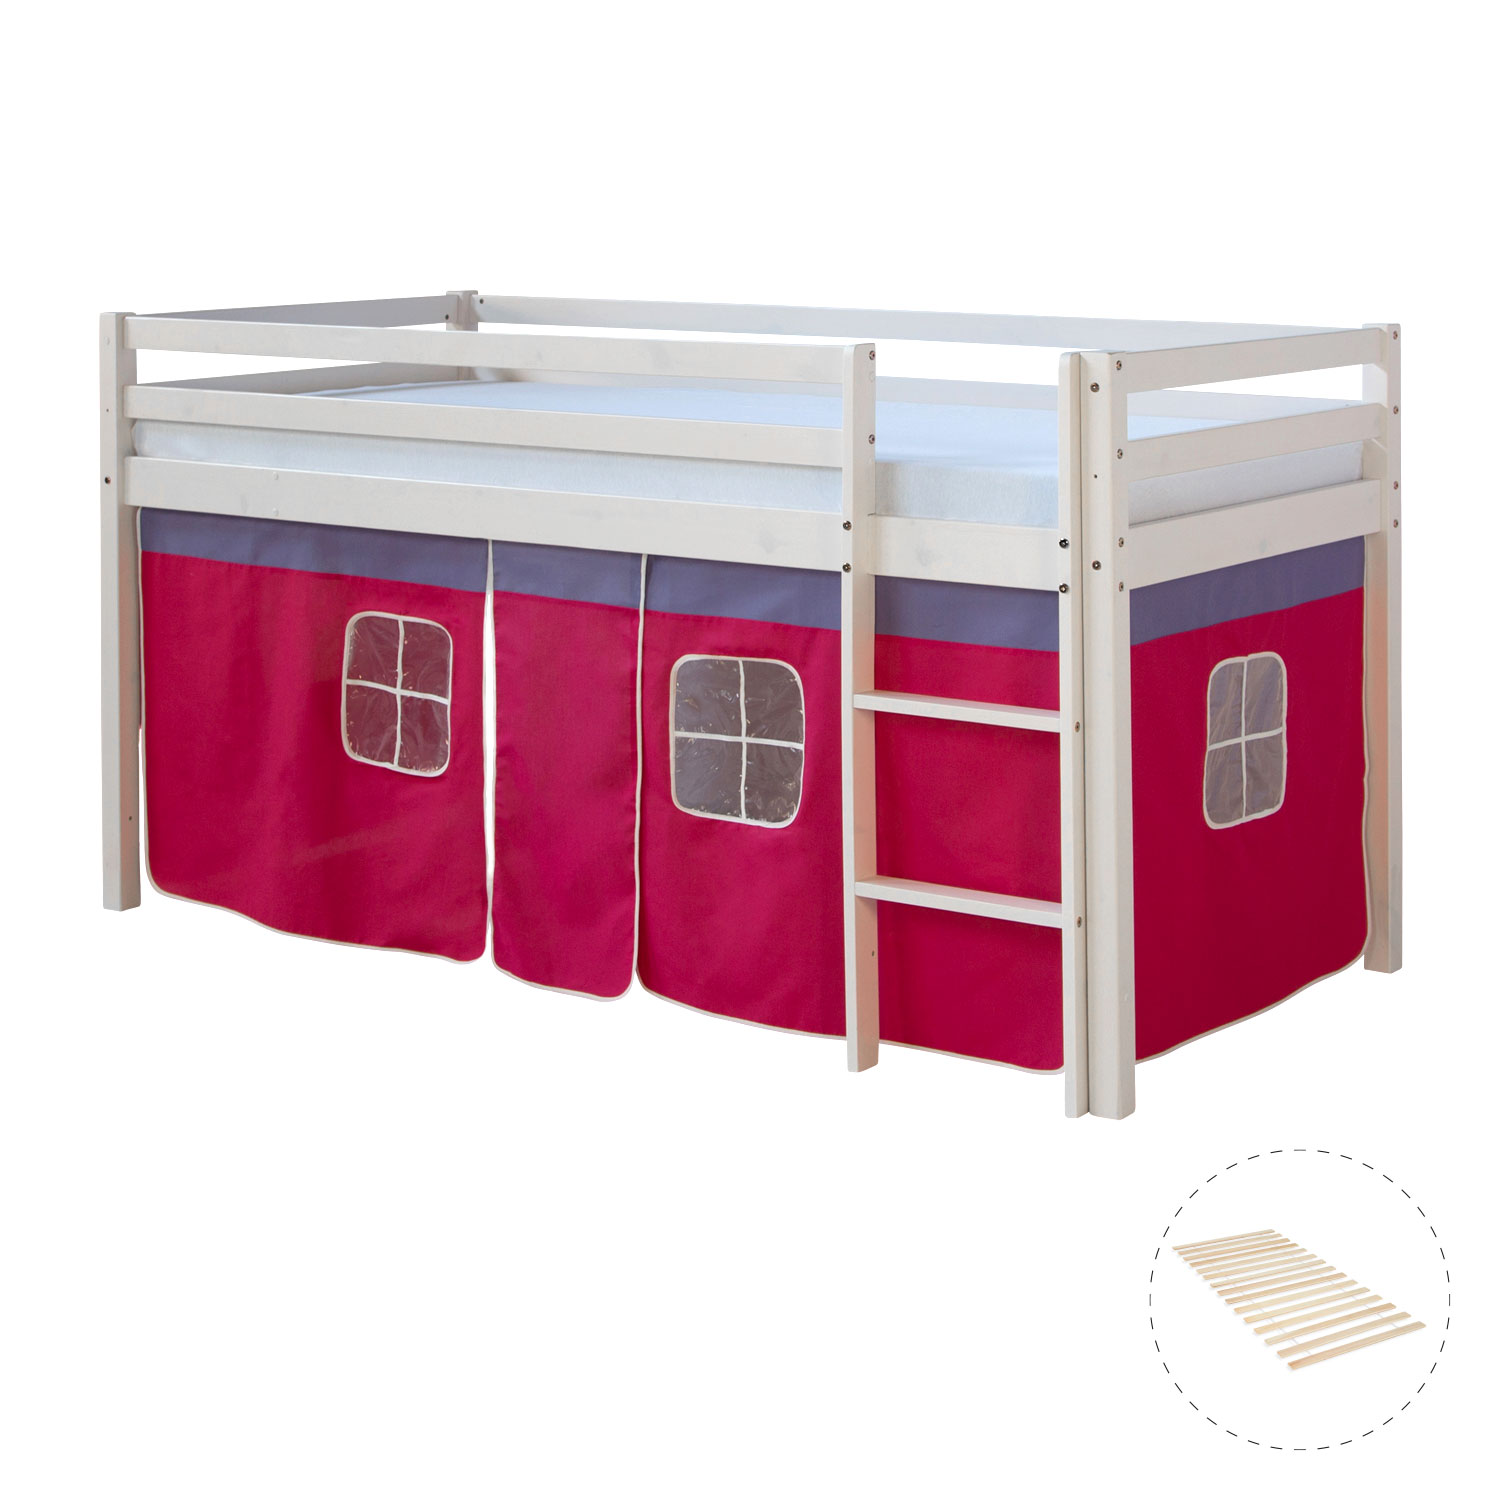 Loftbed 90x200 cm with Slats Bunk bed Childrens bed Solid Pine Wood Curtain Pink